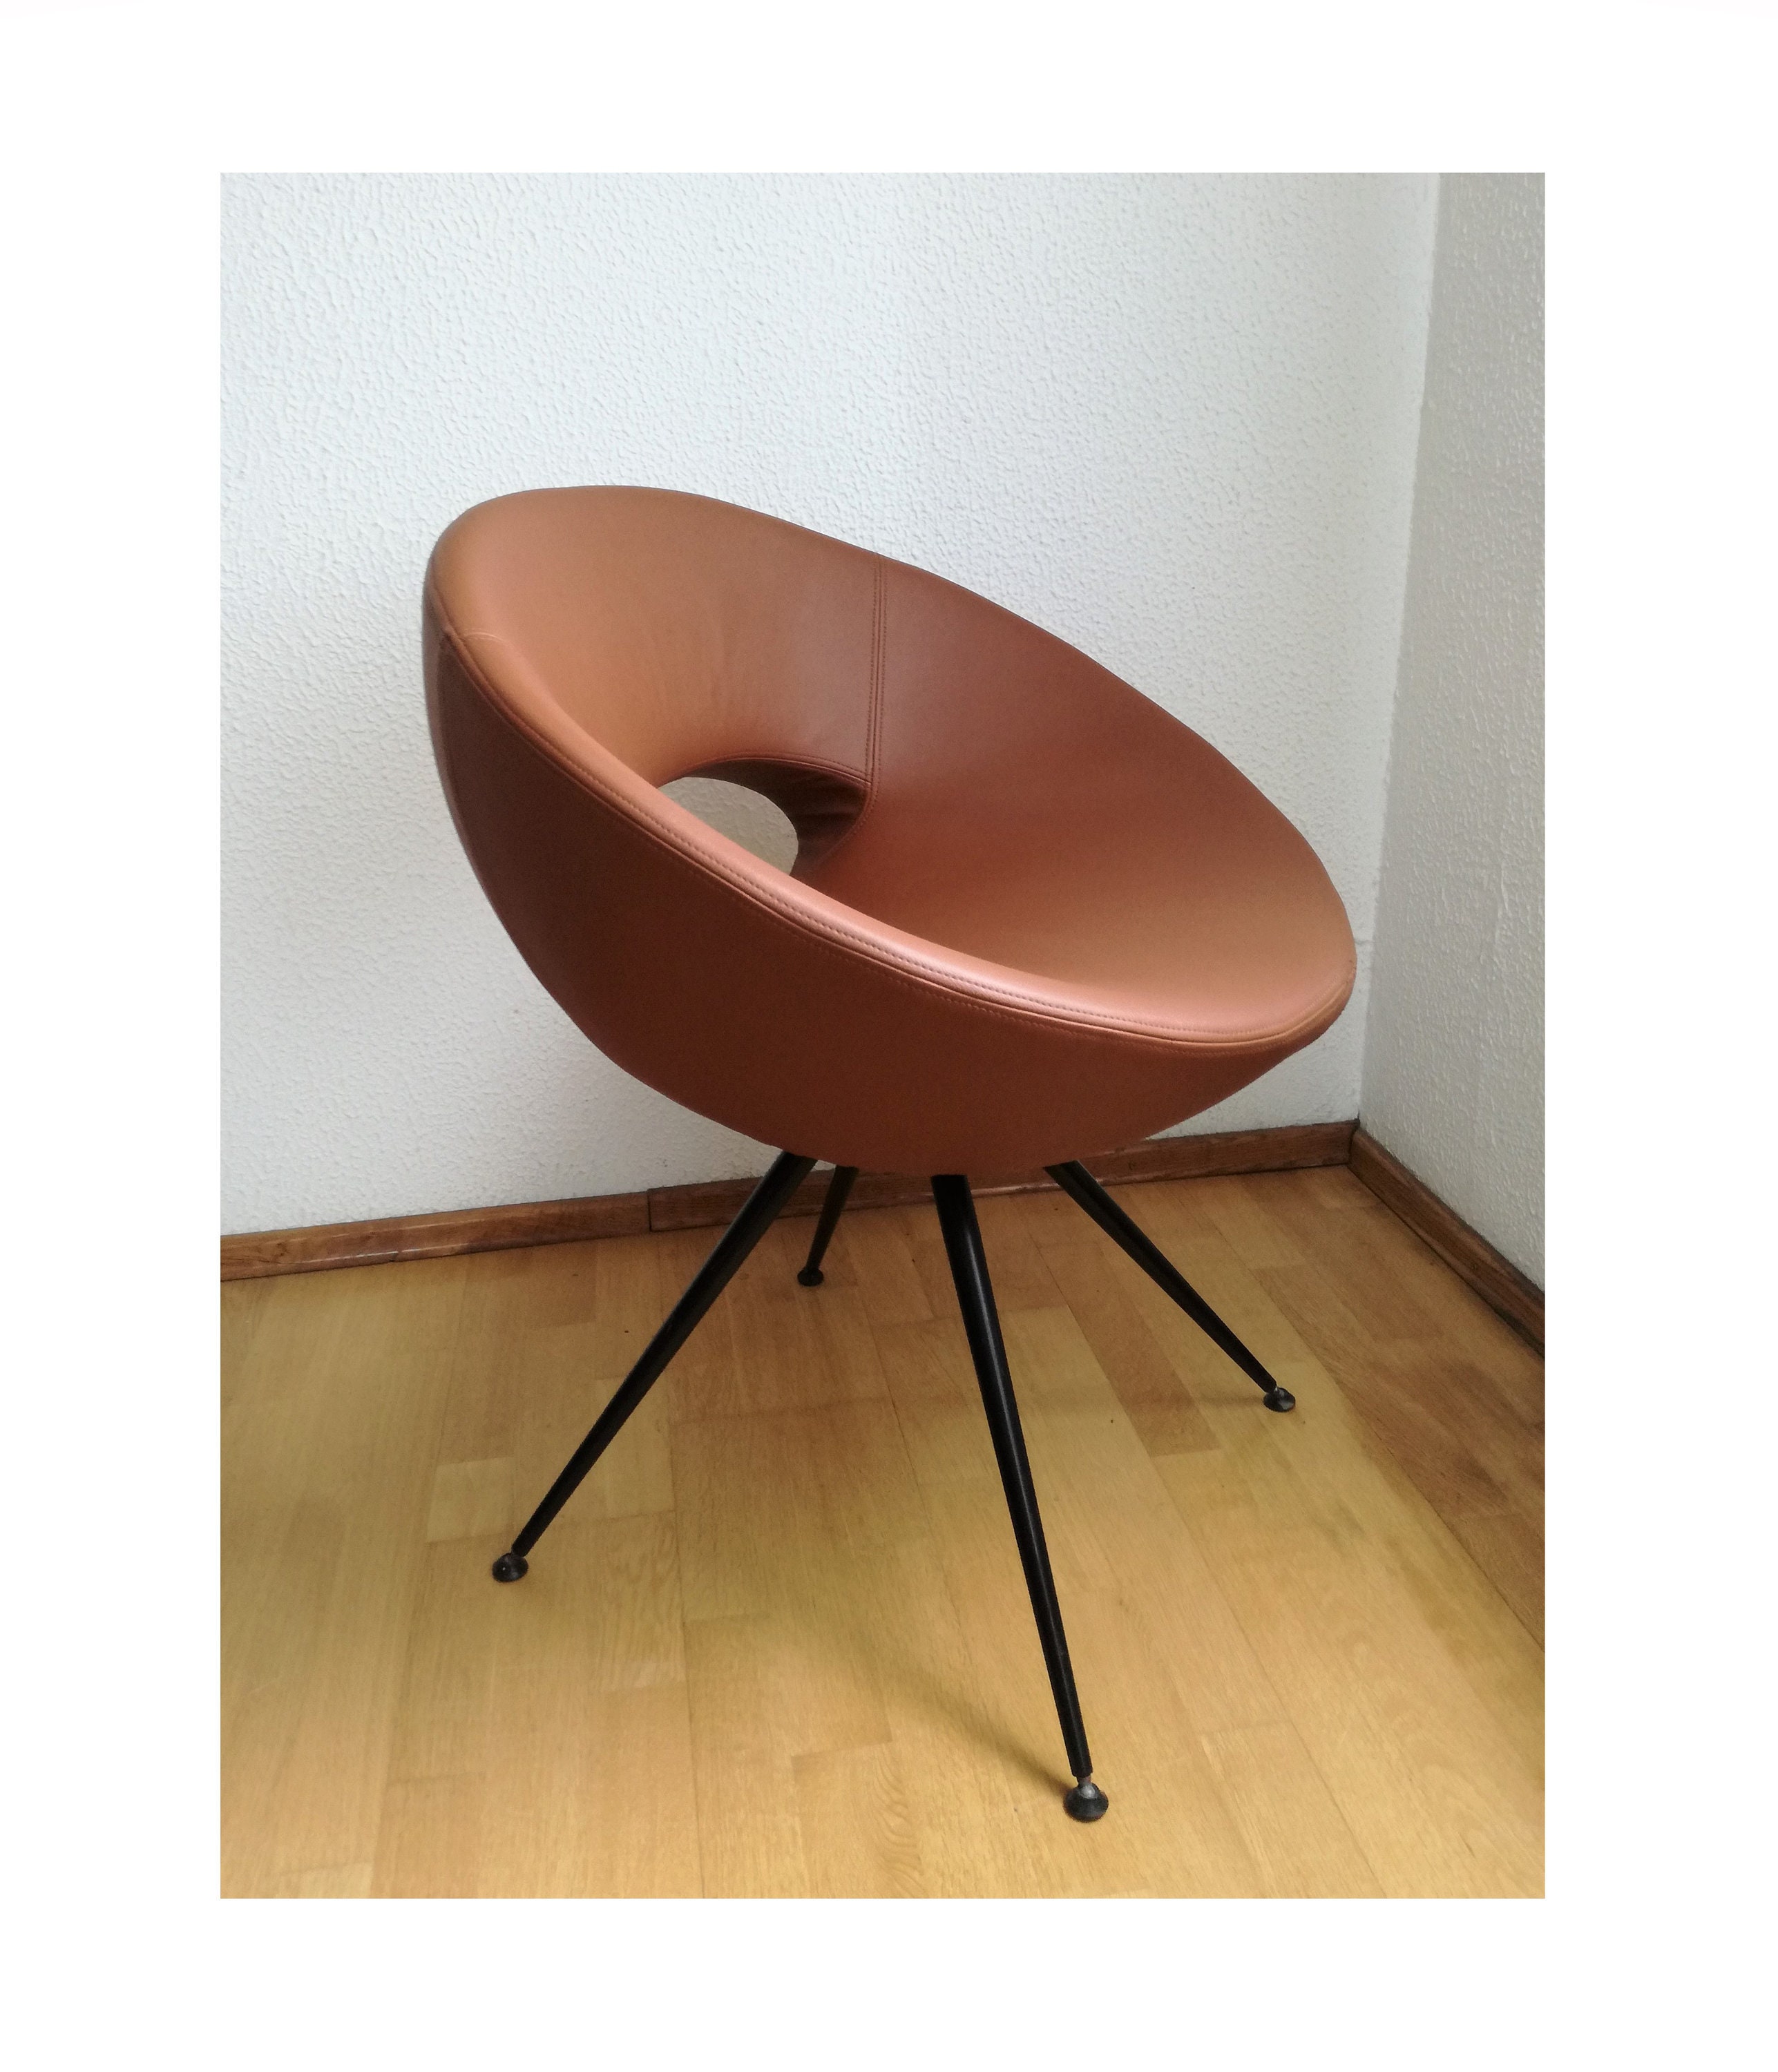 Vintage Round Lounge Chair / Muted Cognac / Faux-leather / 80s - Etsy